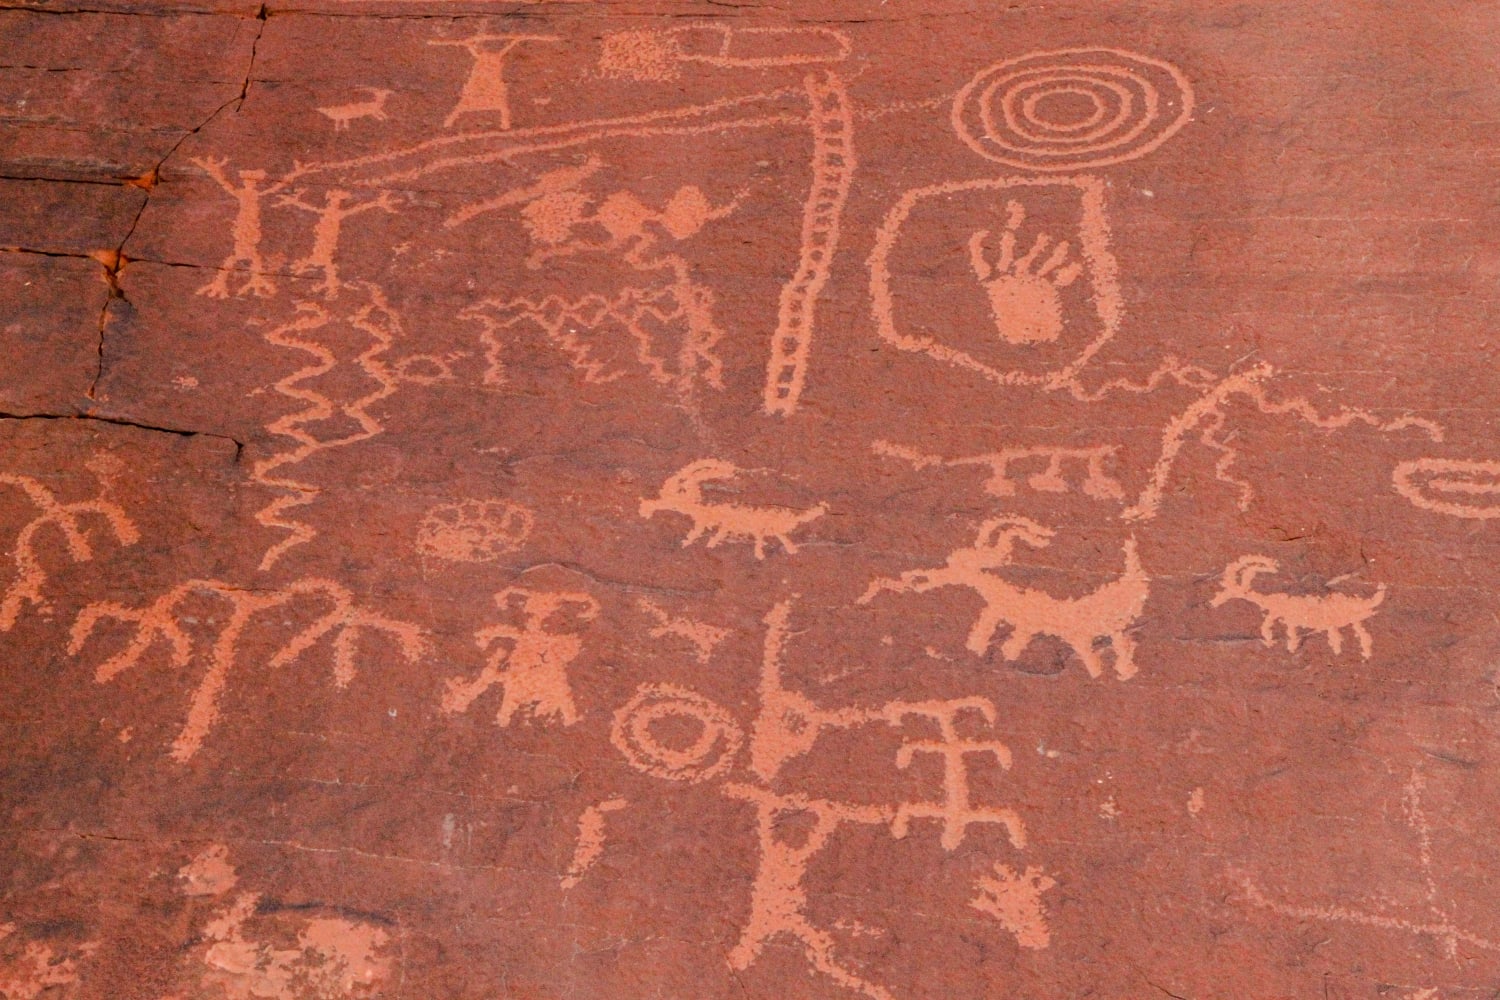 Petroglyphs at Valley of Fire created by the Anasazi. They occupied this area between 300 BC to 1150 AD. .